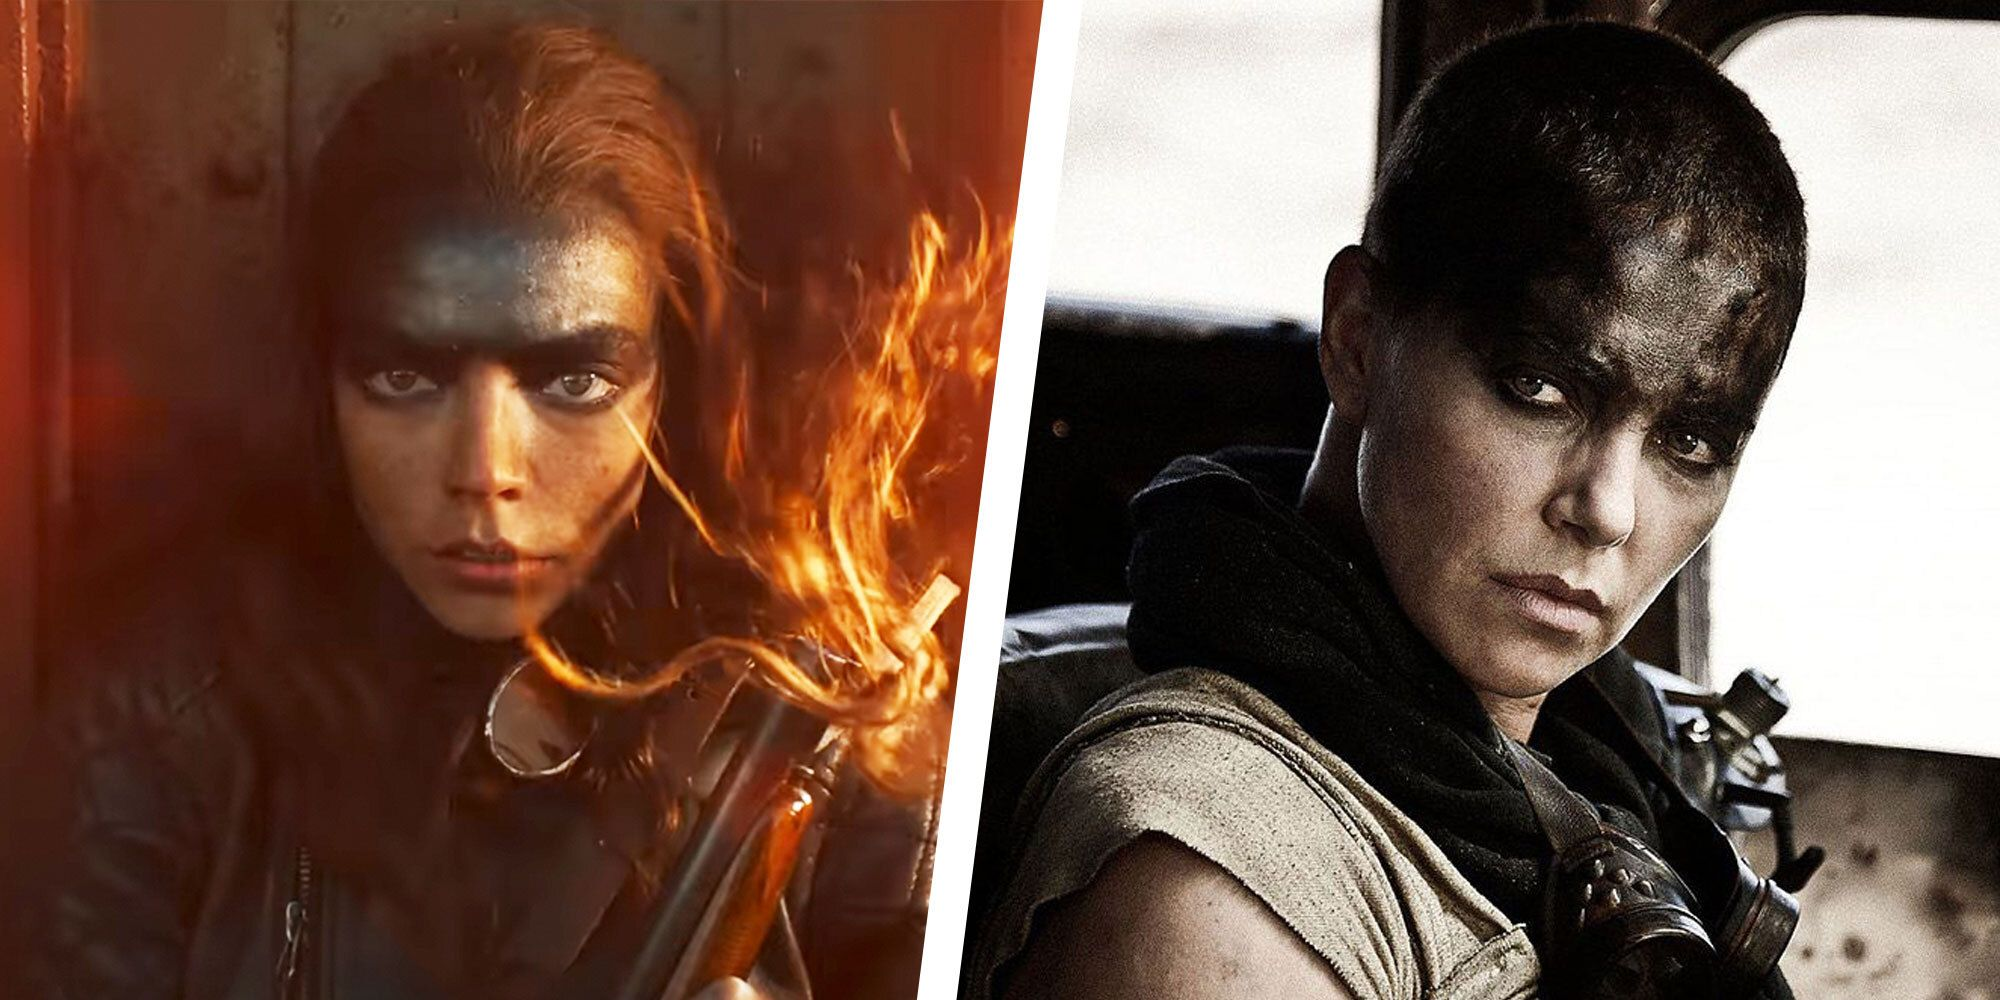 Furiosa a Mad Max Saga: Release Date, Cast & Everything We Know About?